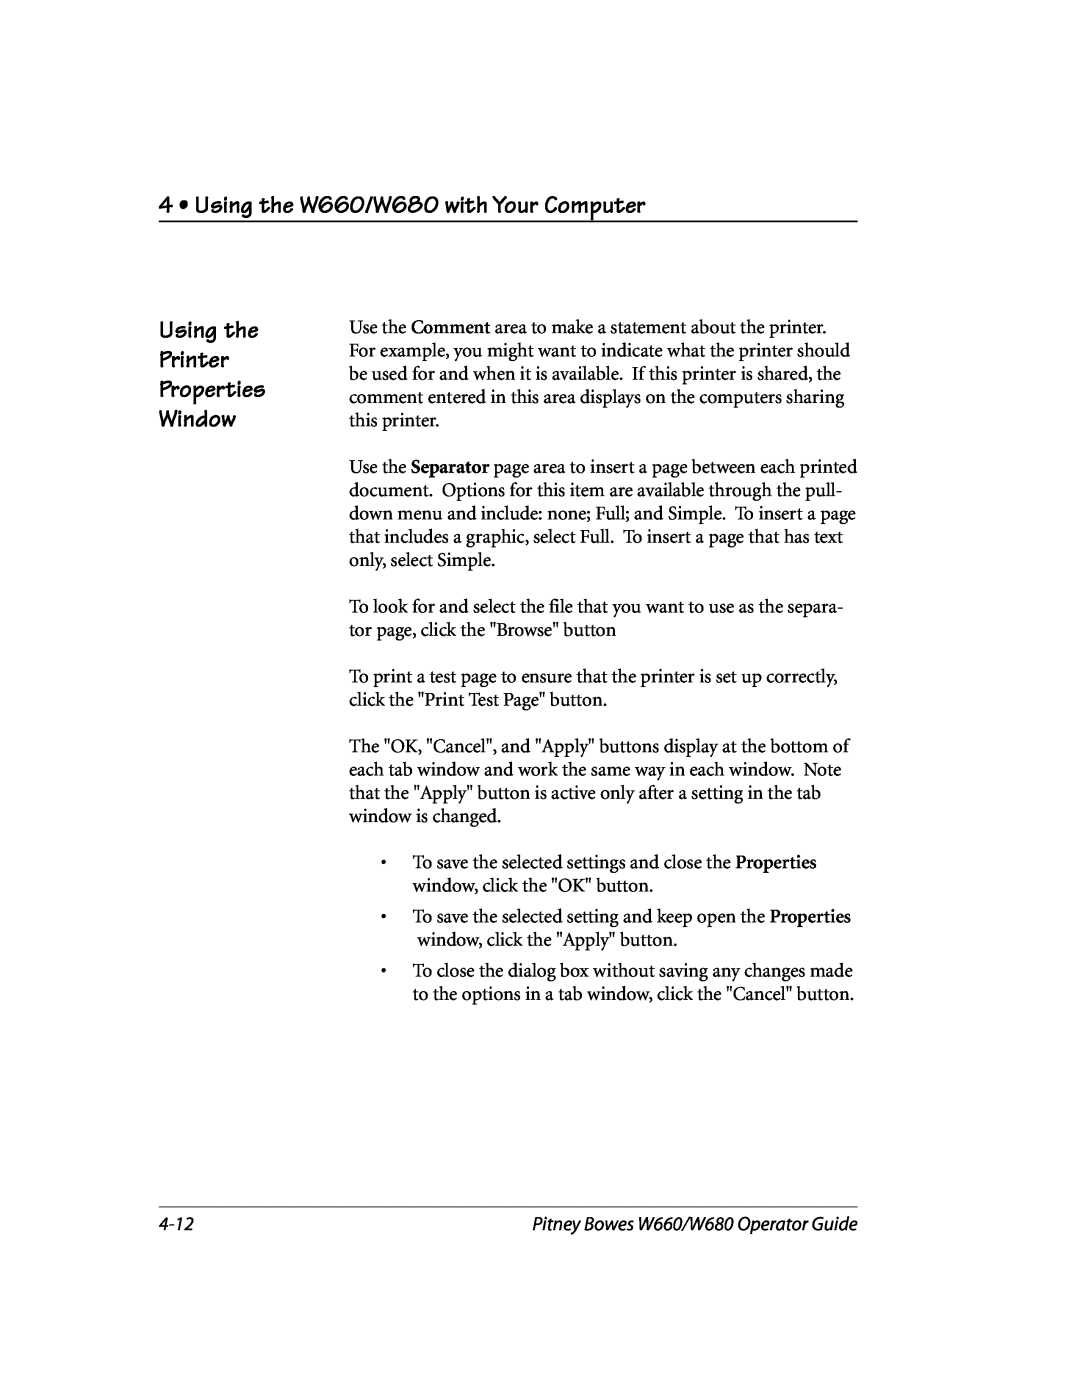 Pitney Bowes manual Using the W660/W680 with Your Computer, Using the Printer Properties Window 